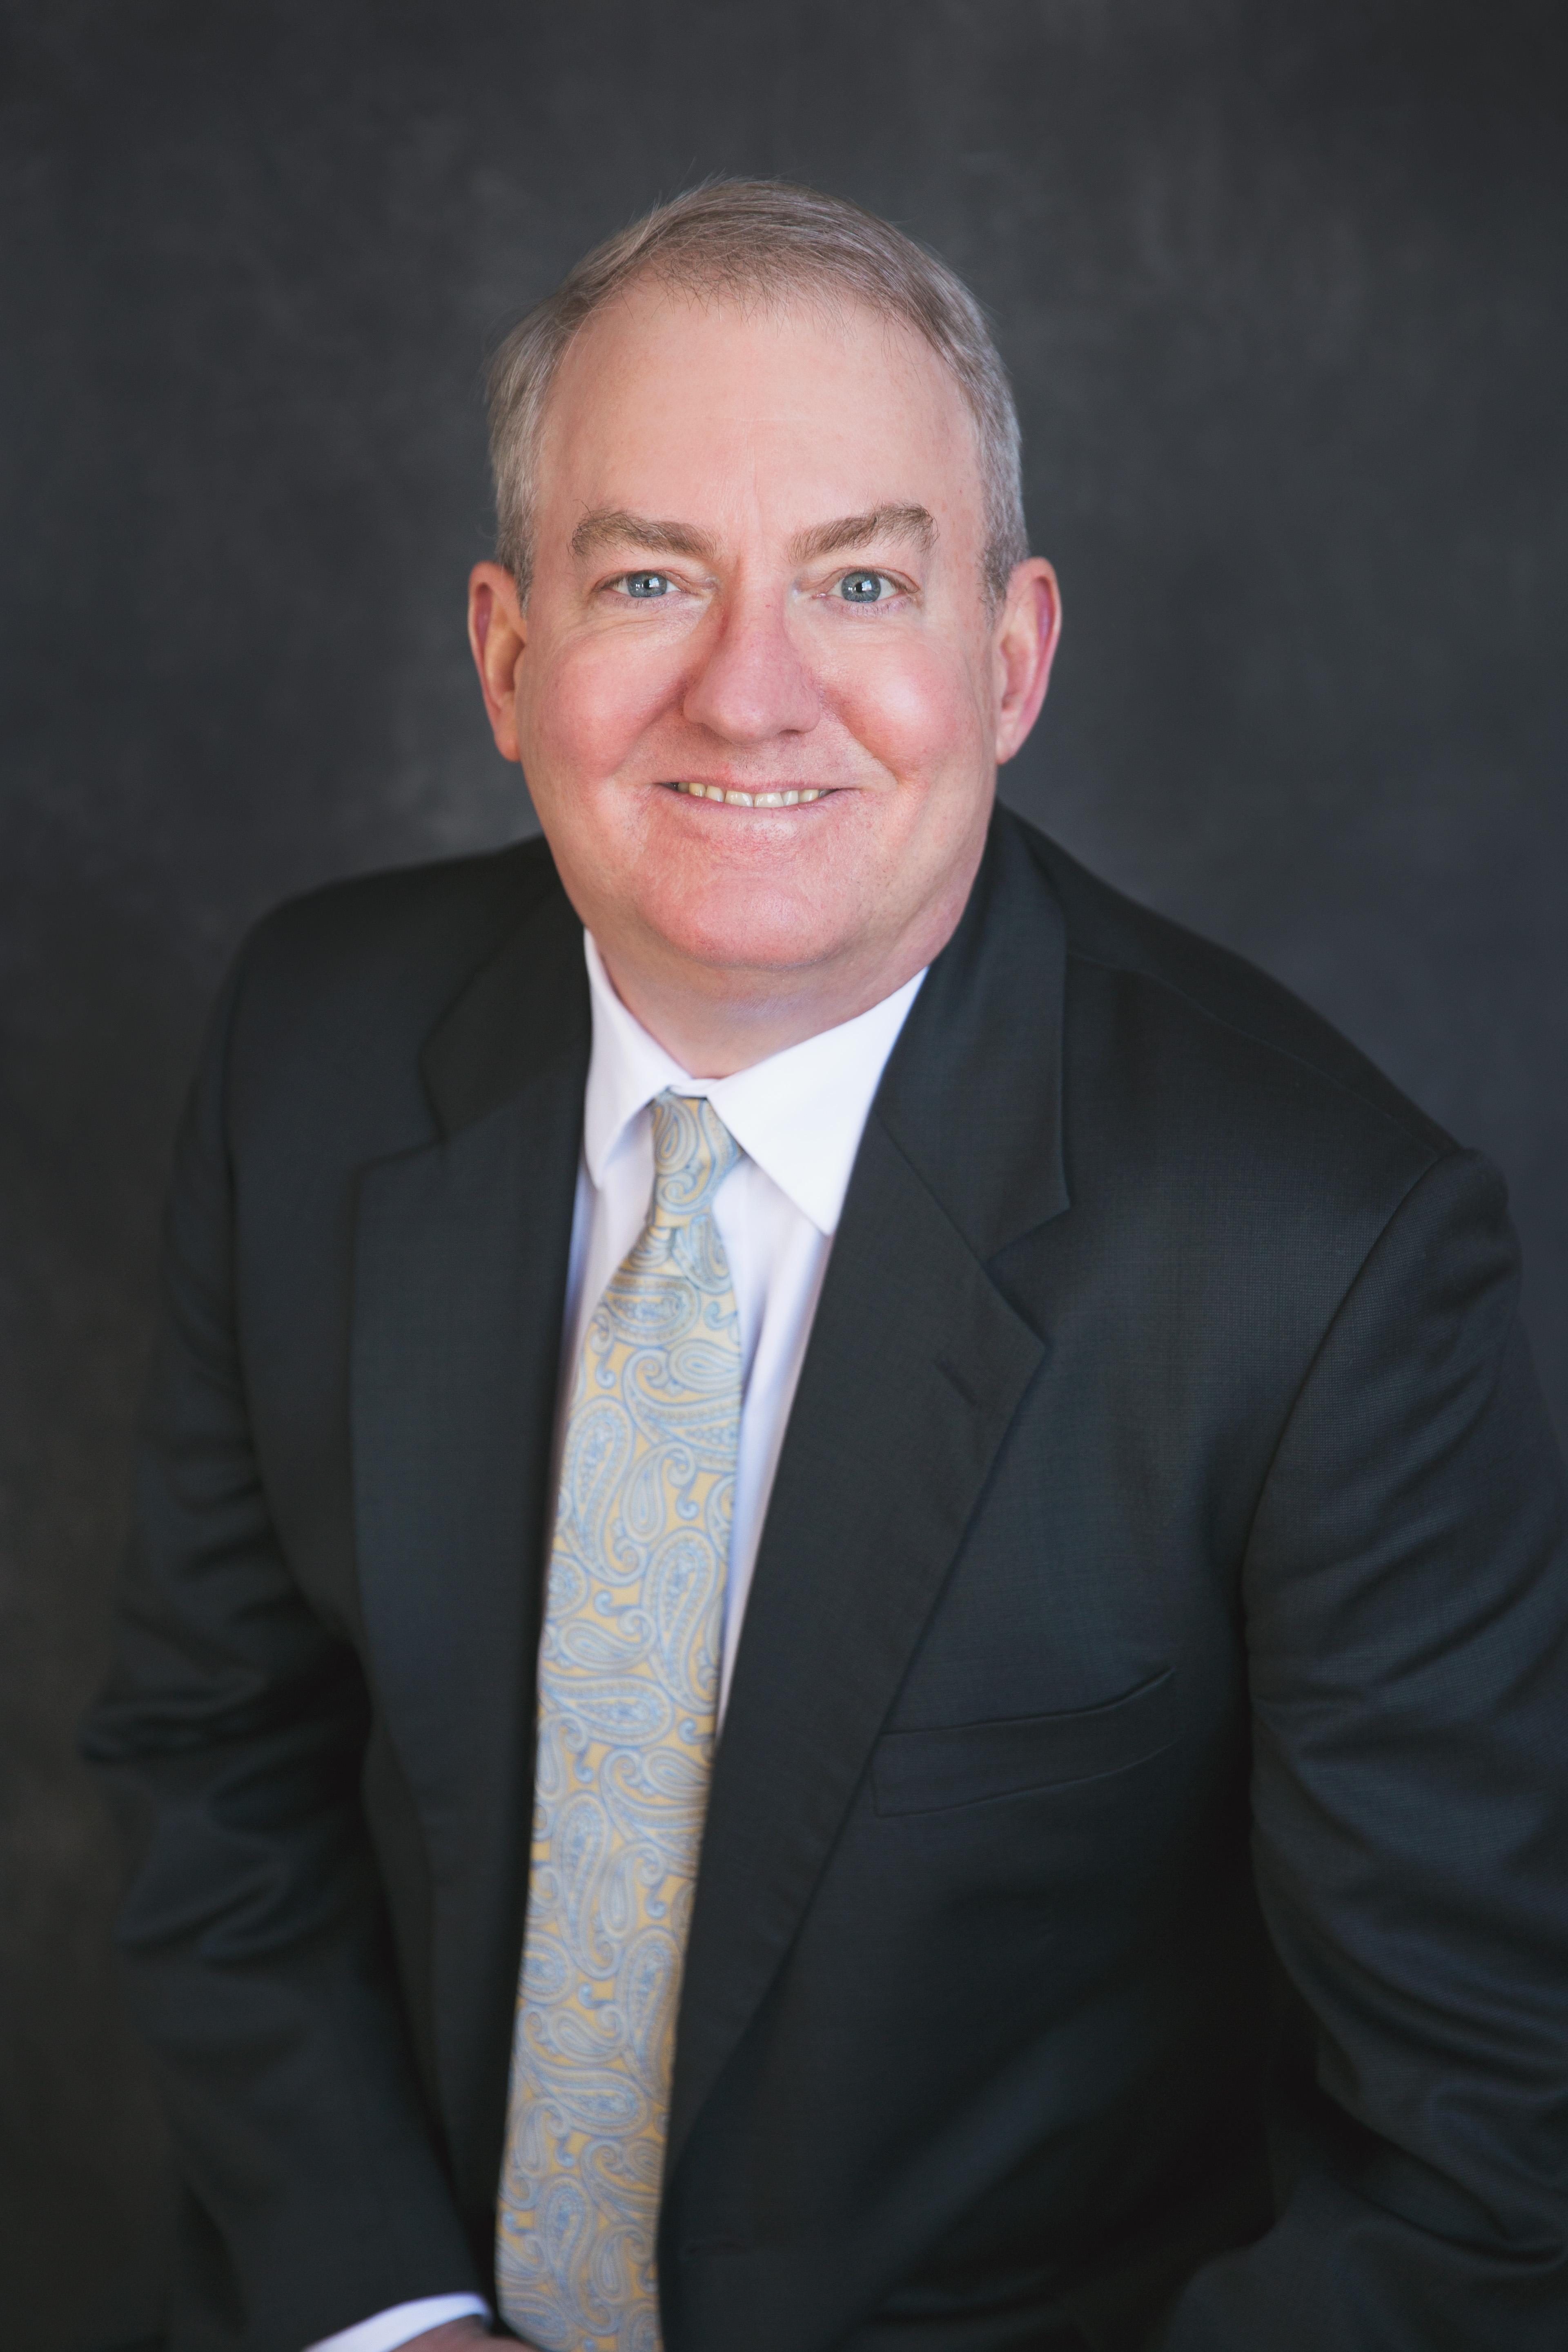 Professional photo of Dr. Cliff Coppersmith, Chesapeake College President